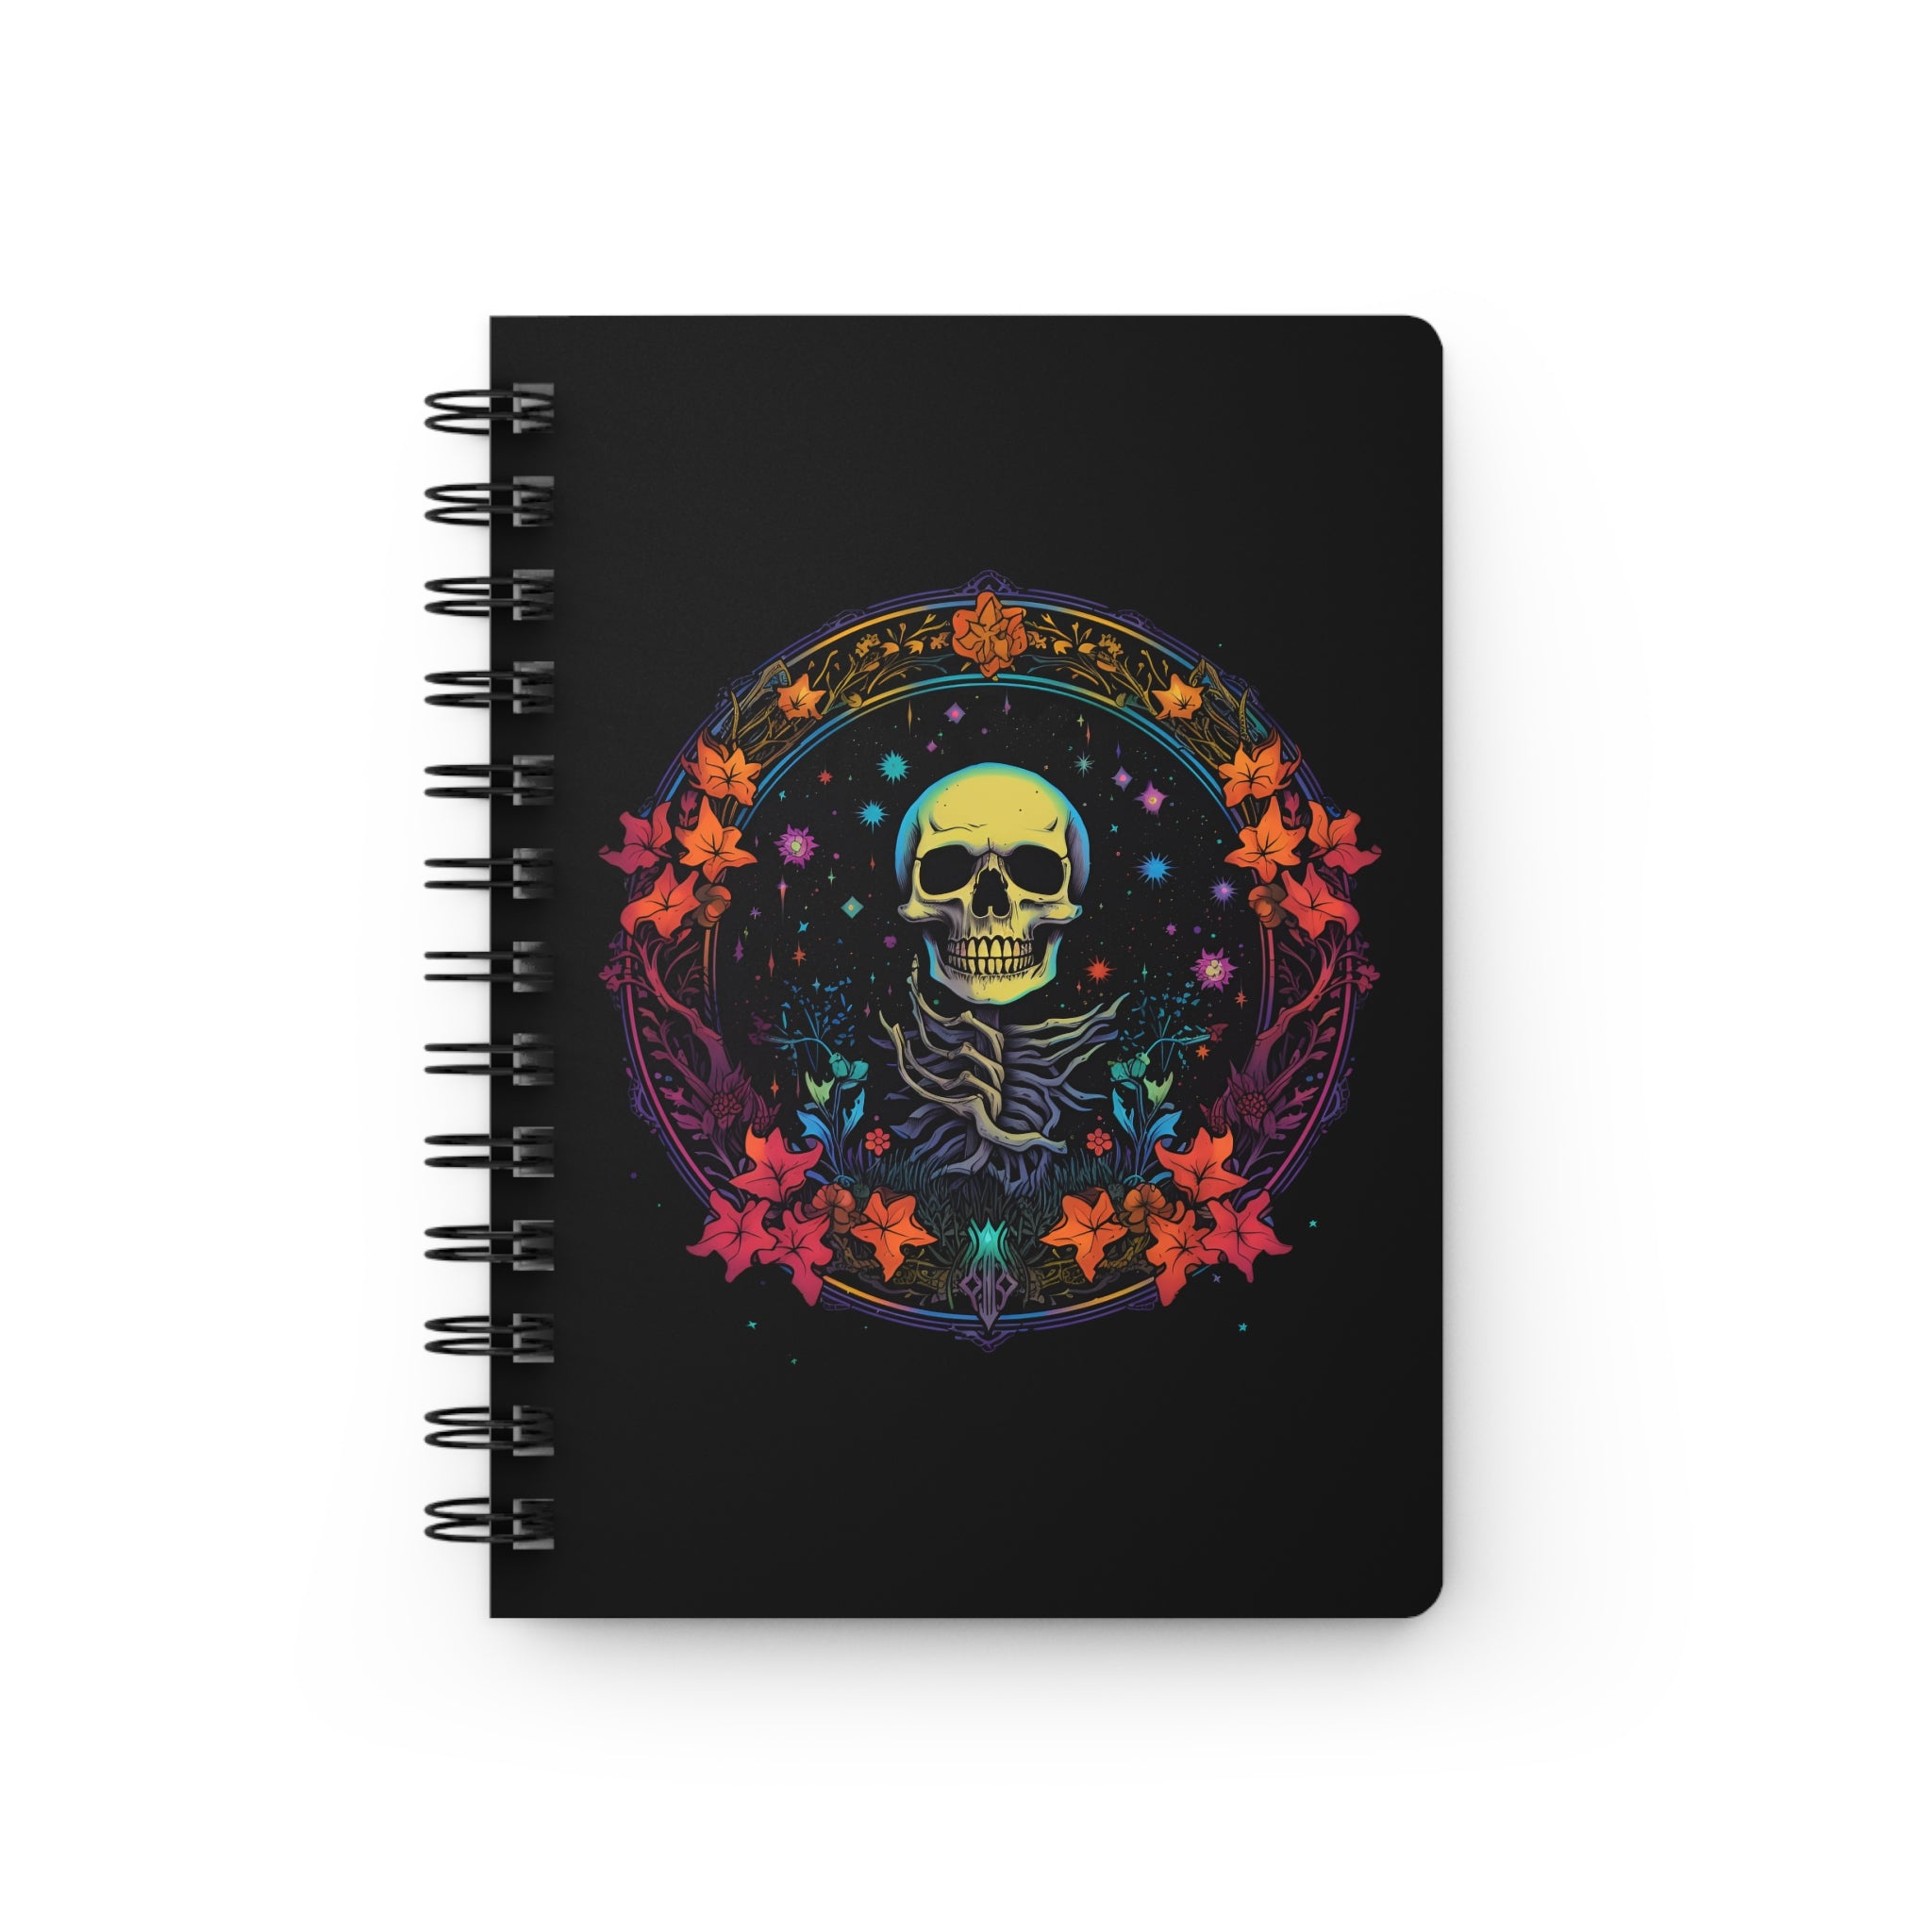 Midwest Gothic Floral Skull Lined Notebook, Spiral Lined 5 x 7 inch